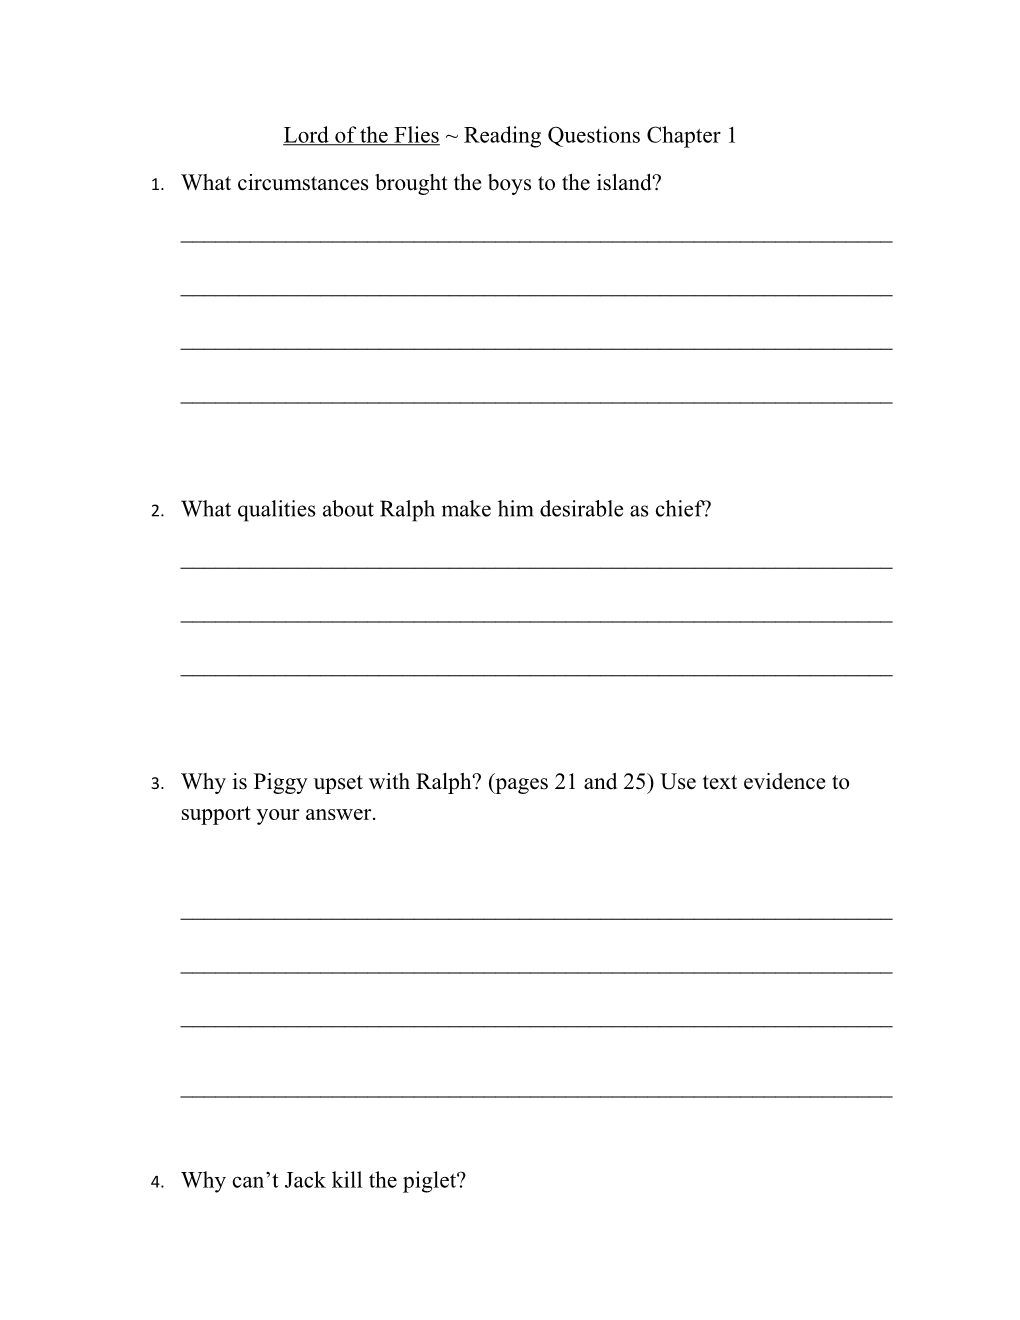 Lord of the Flies Reading Questions Chapter 1